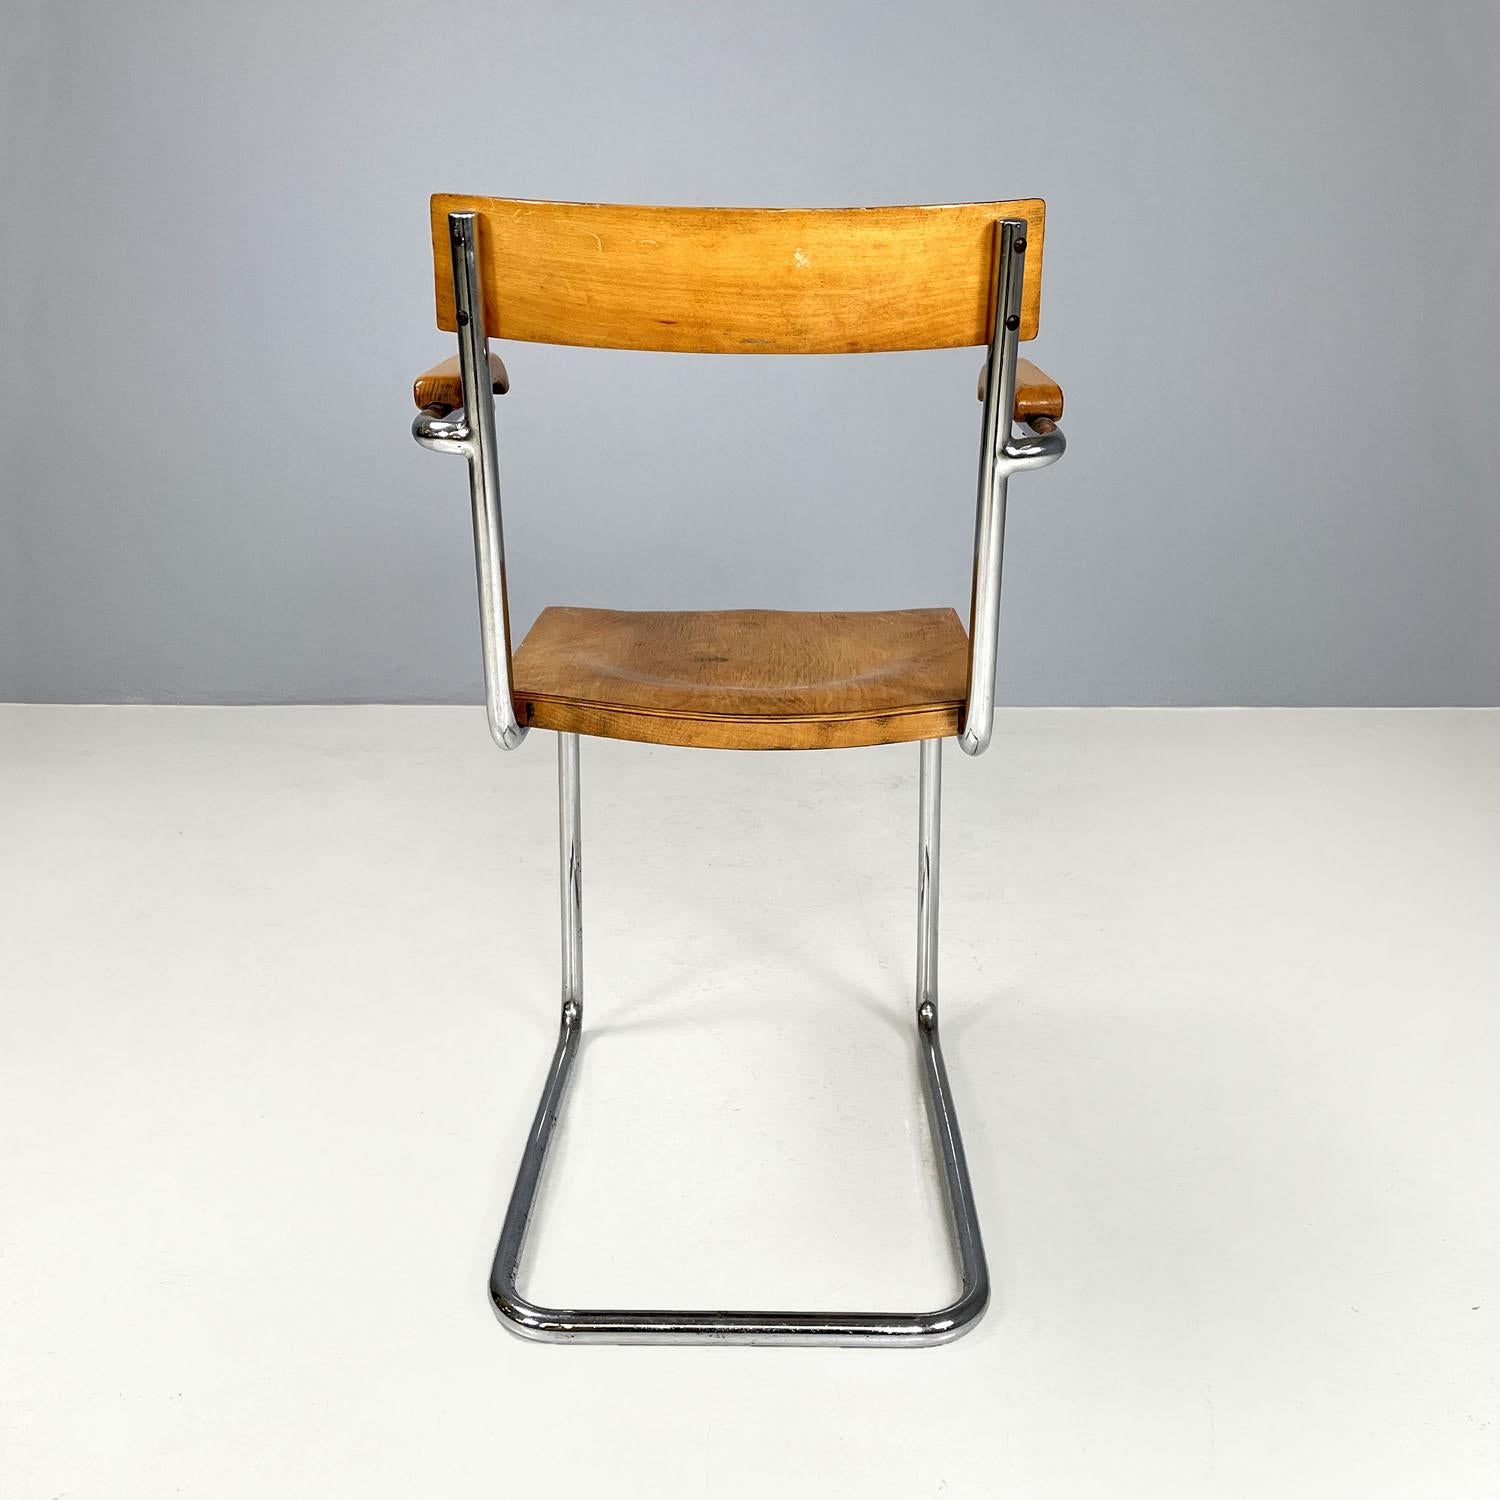 Mid-20th Century Czech Art Deco wood and chromed steel chair with armrests by Ladislav Zak, 1930s For Sale